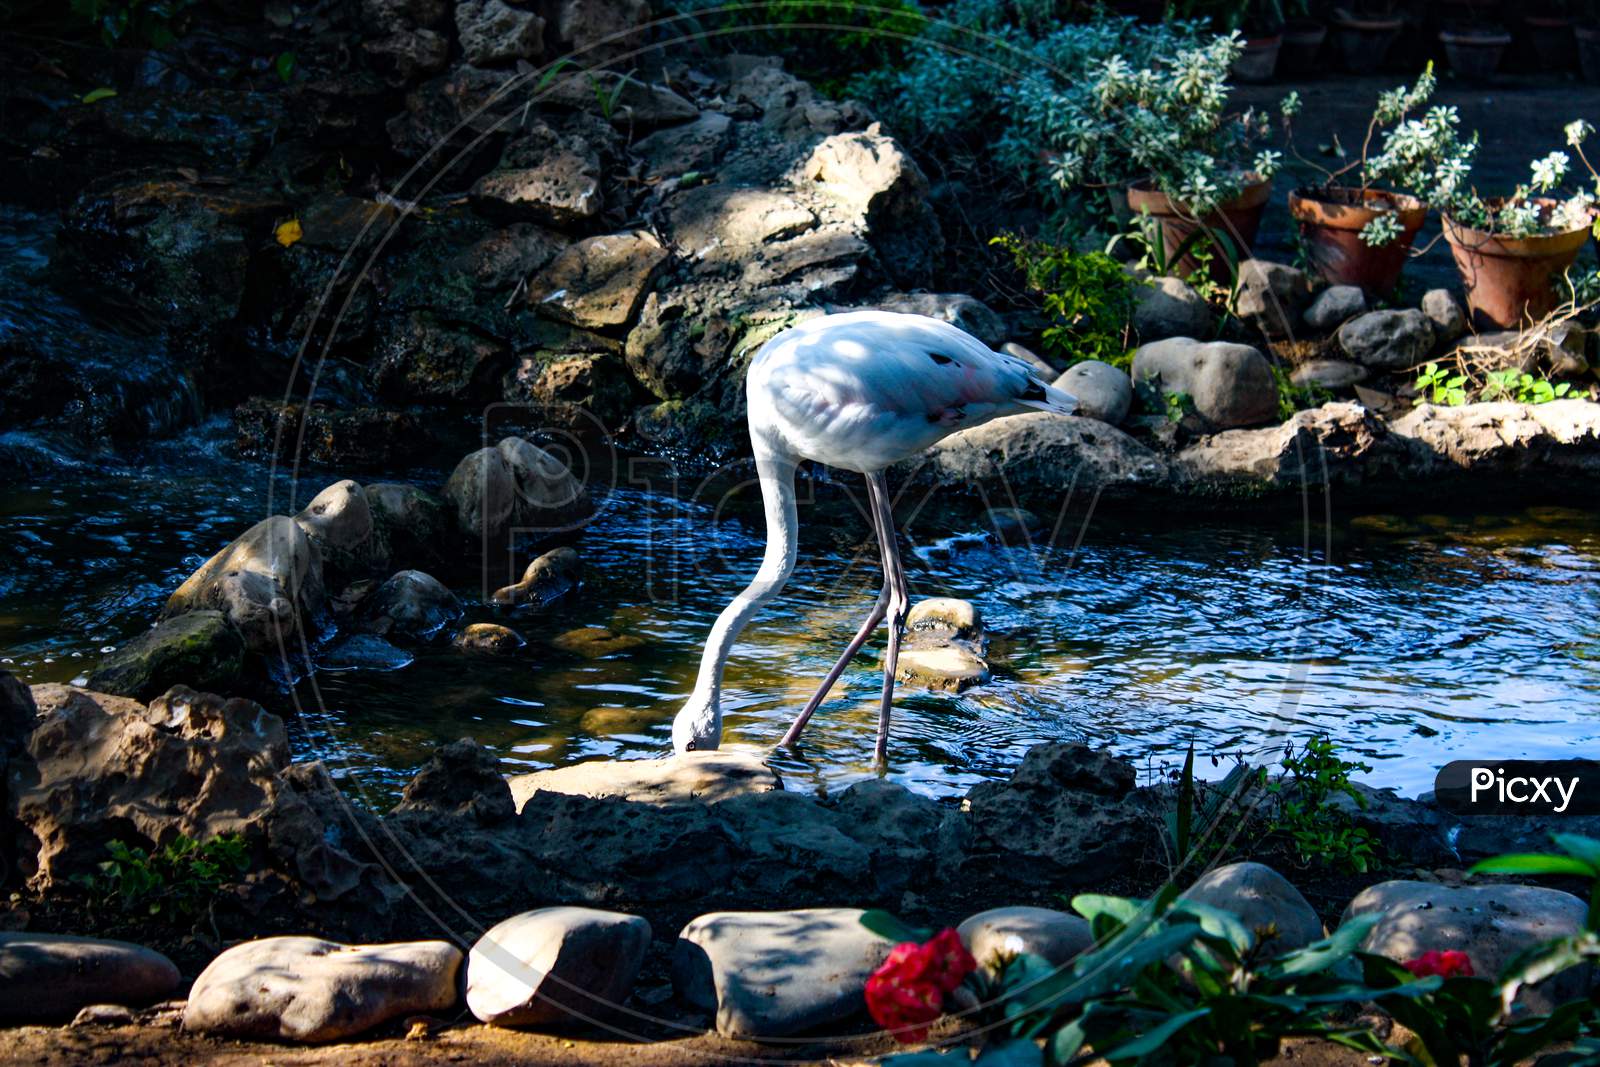 A White Flamingo while drinking water